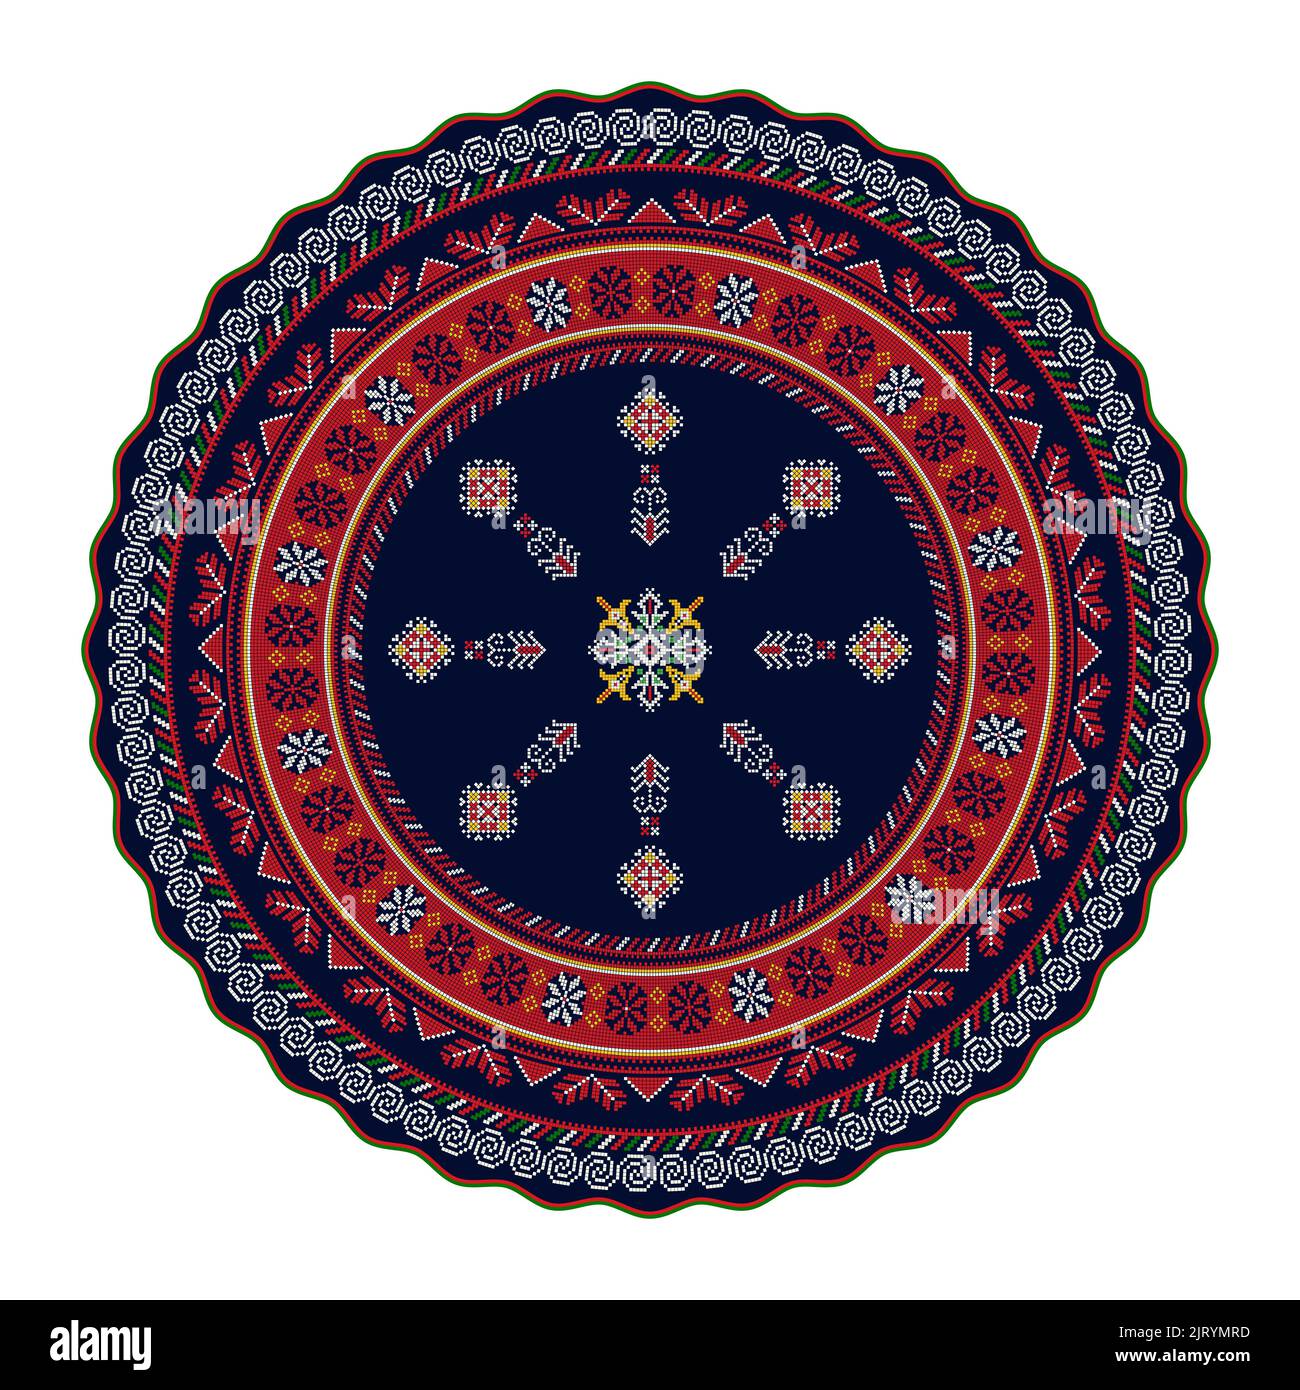 Ukrainian embroidery round symbol, vector graphic over white background Stock Photo